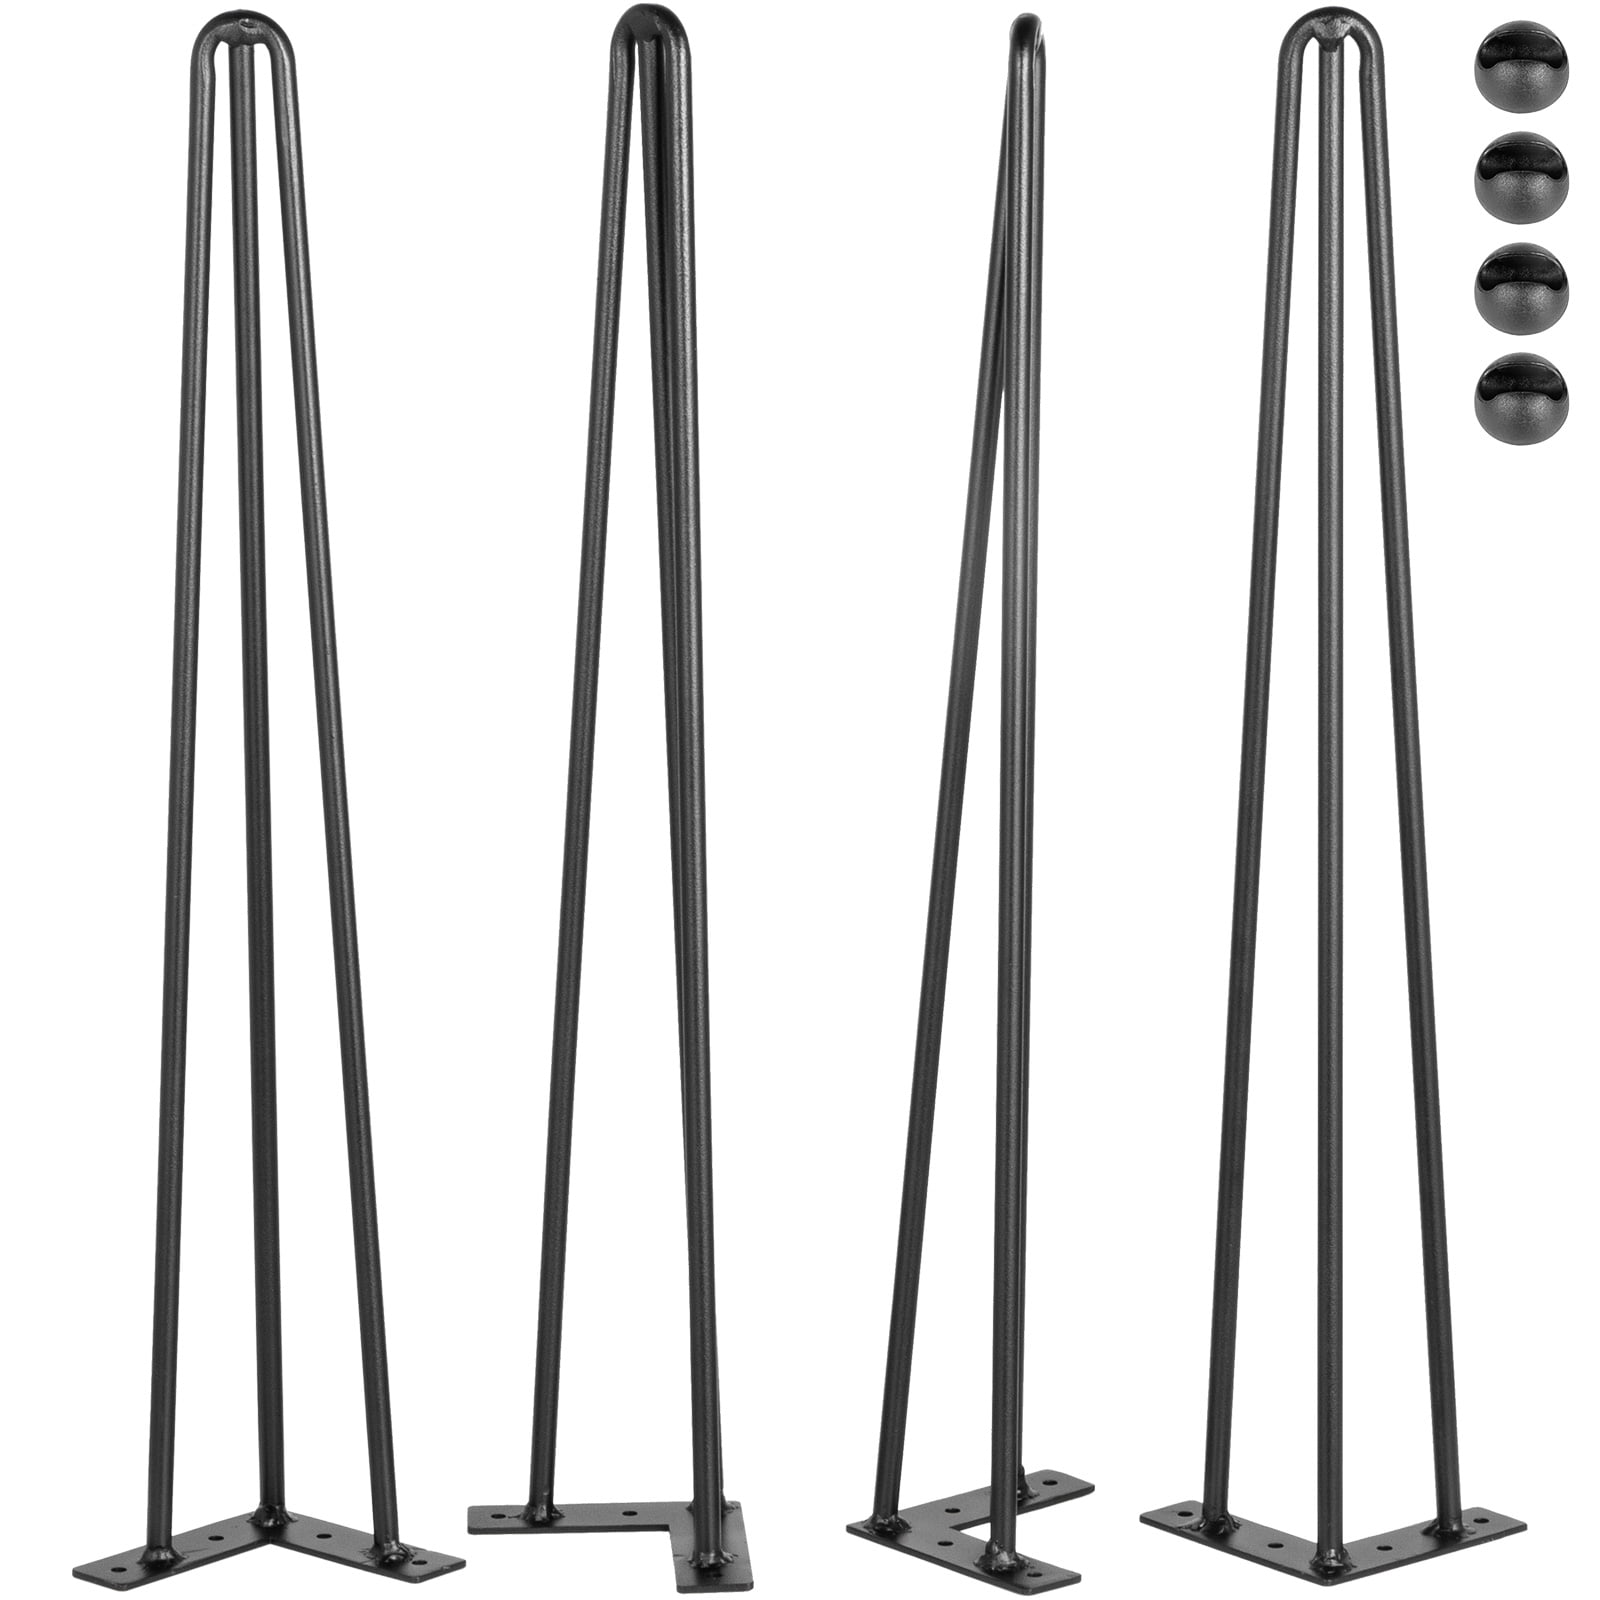 Details about   4Pack Hairpin Table Legs Heavy Duty Black Iron Metal Rods Industrial Style 8-30" 